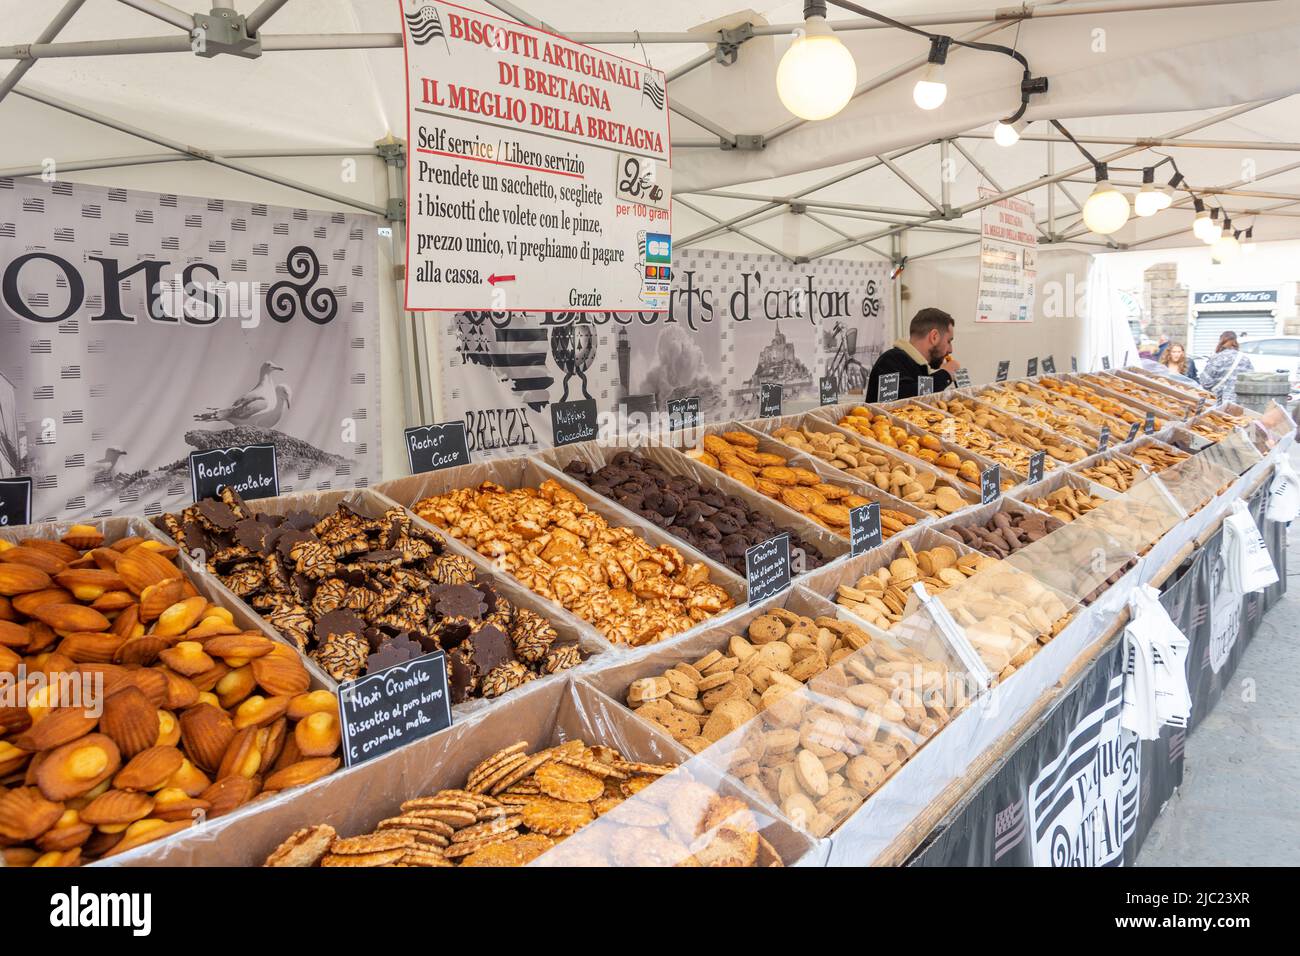 Biscotti (biscuit) market stall, Piazza di Santa Croce, Florence (Firenze), Tuscany Region, Italy Stock Photo